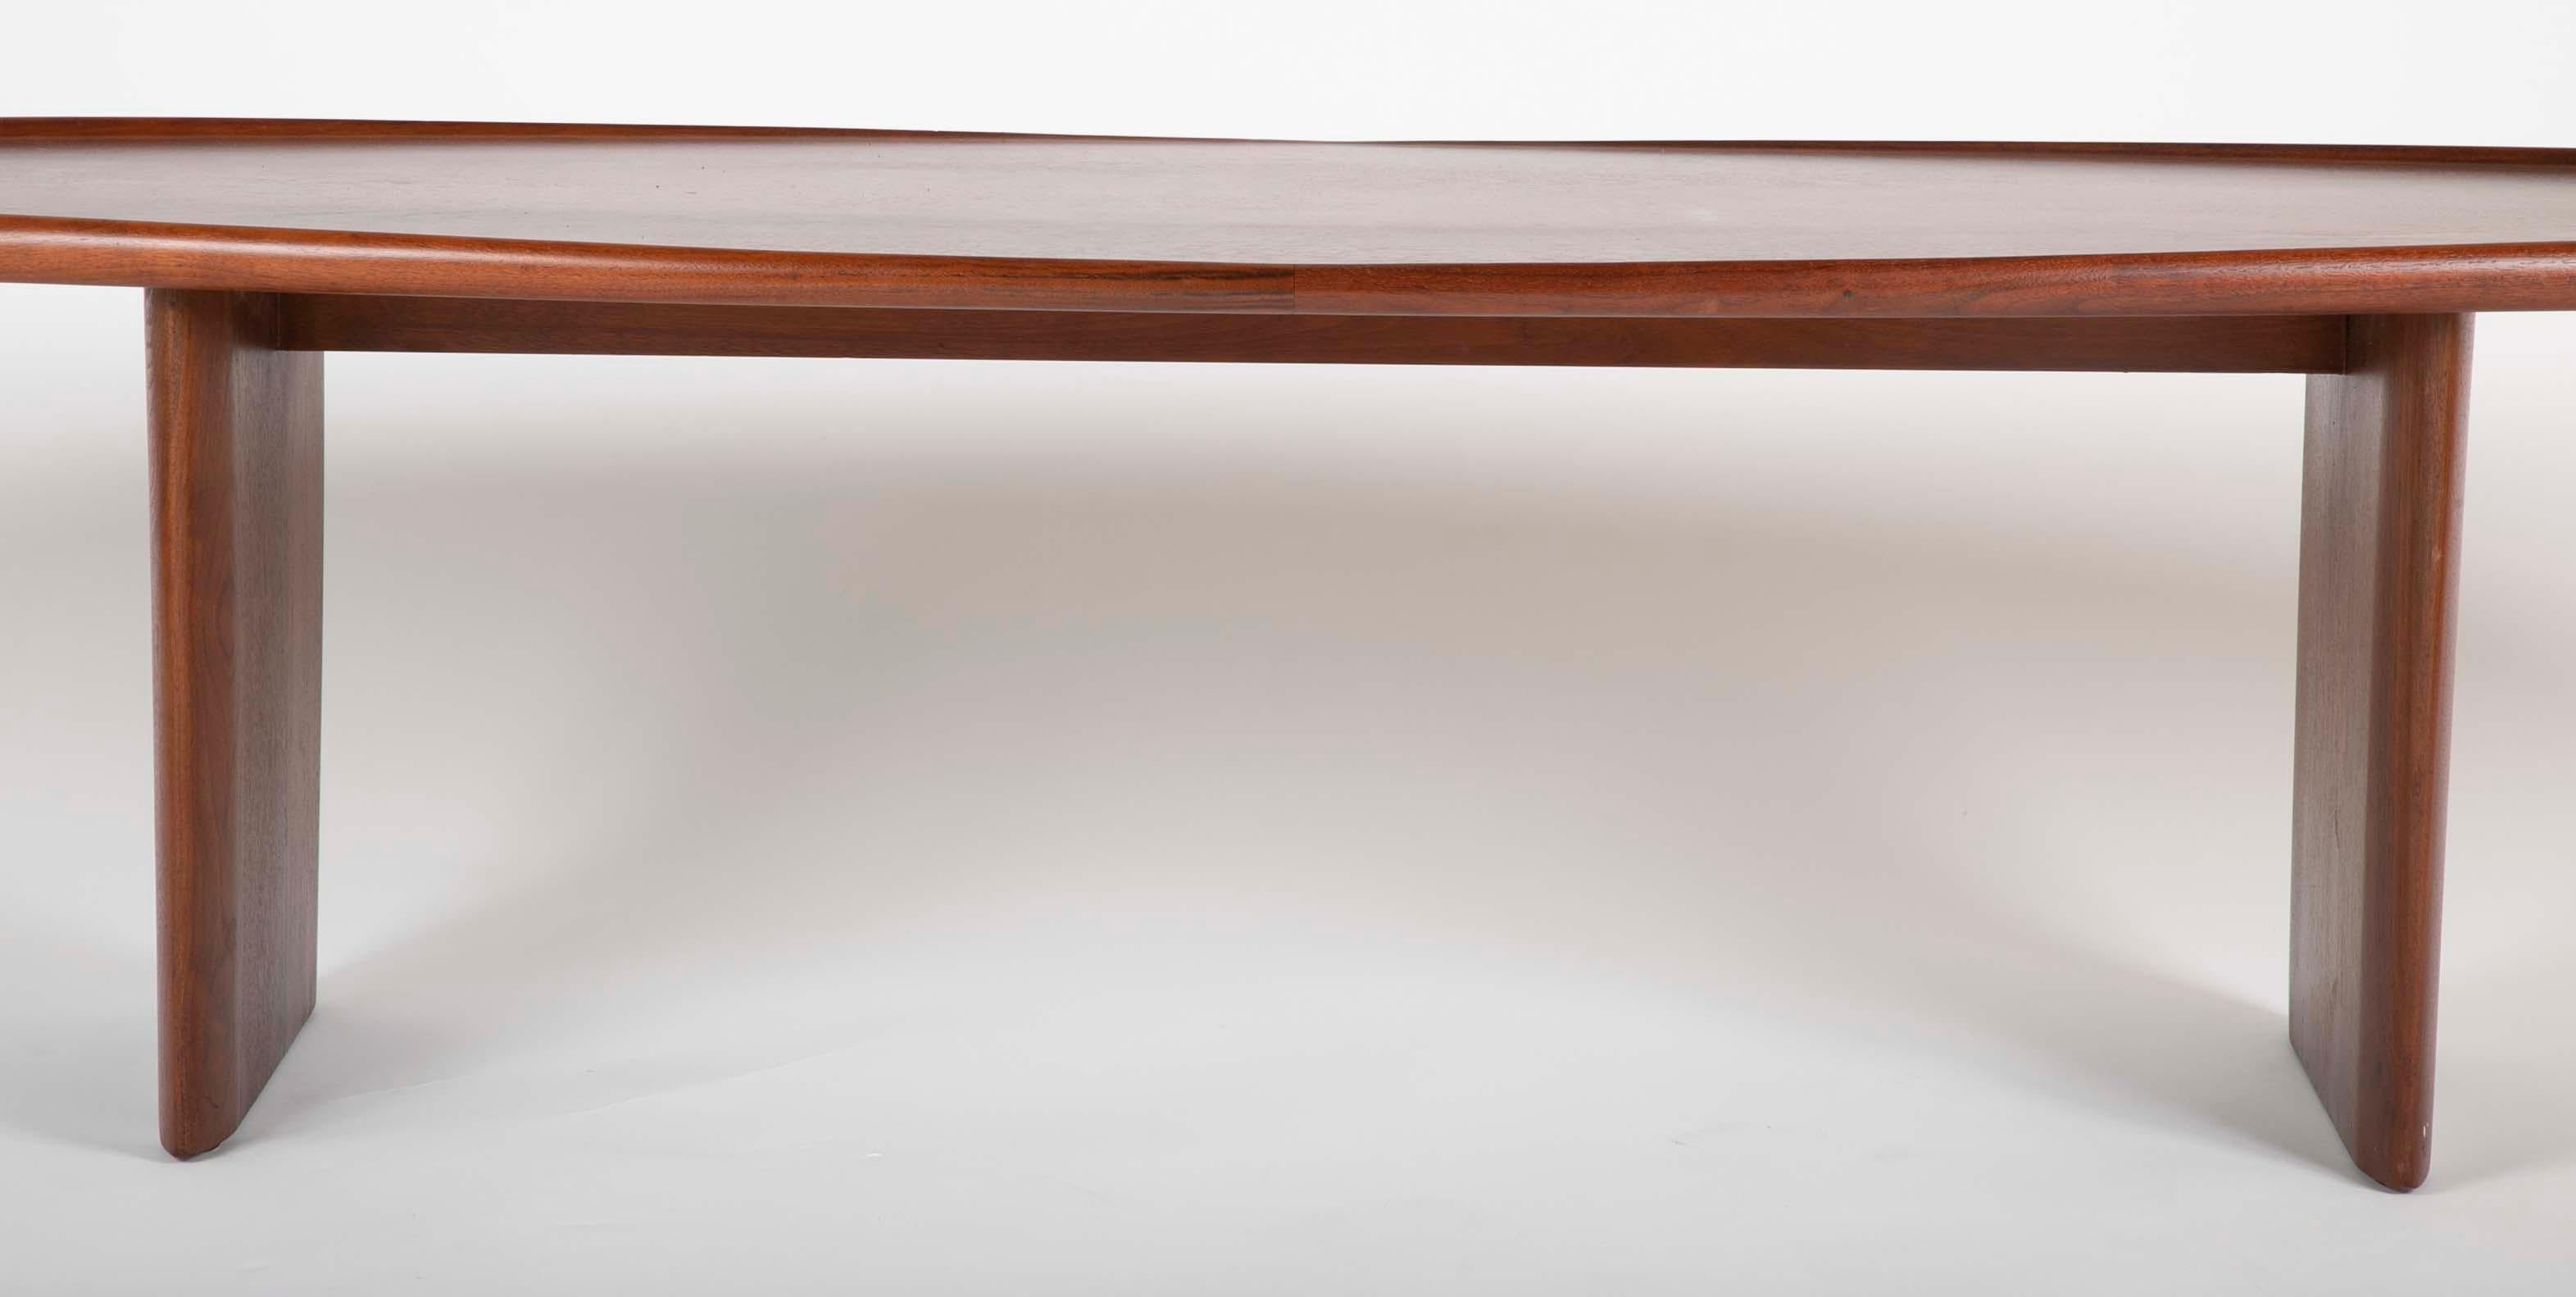 Walnut Coffee Table Designed by T.H. Robsjohn-Gibbings for Widdicomb In Good Condition For Sale In Stamford, CT